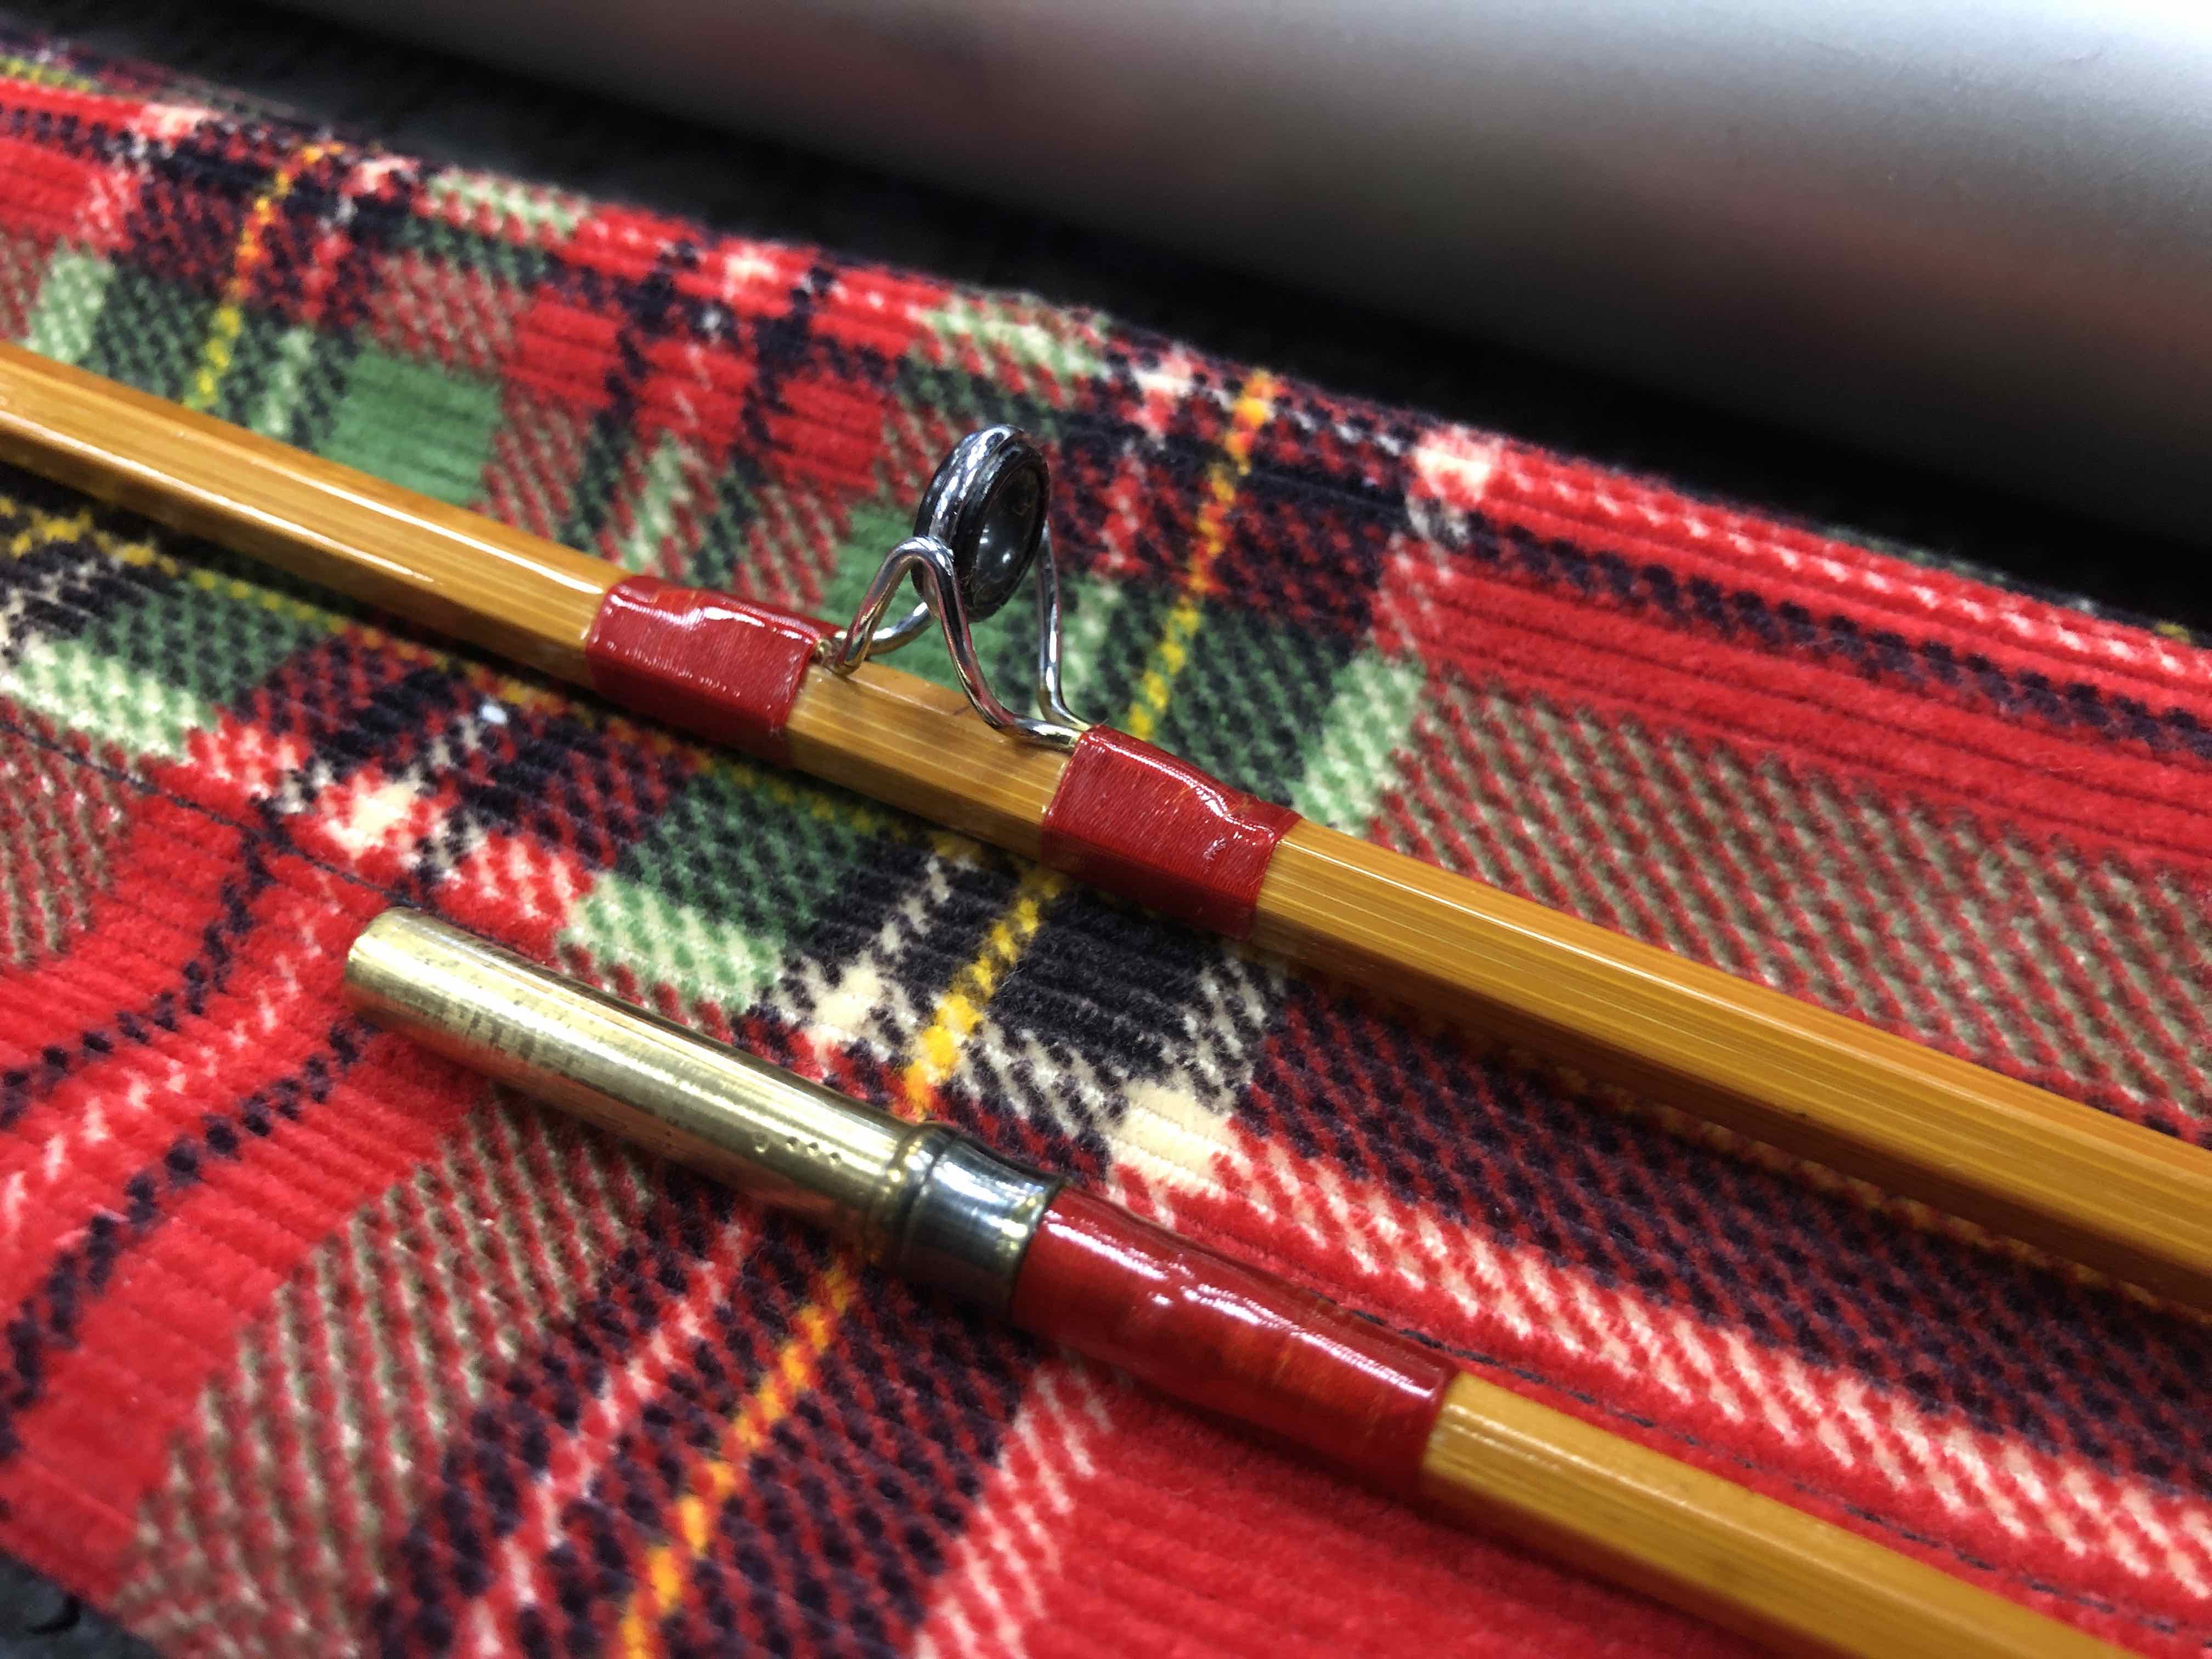 Orvis "Fly Weight" Bamboo Cane Rod - 1976 Cane Blank Kit - 2 Pc - 7’ - 4Wt- LIKE NEW! - $350